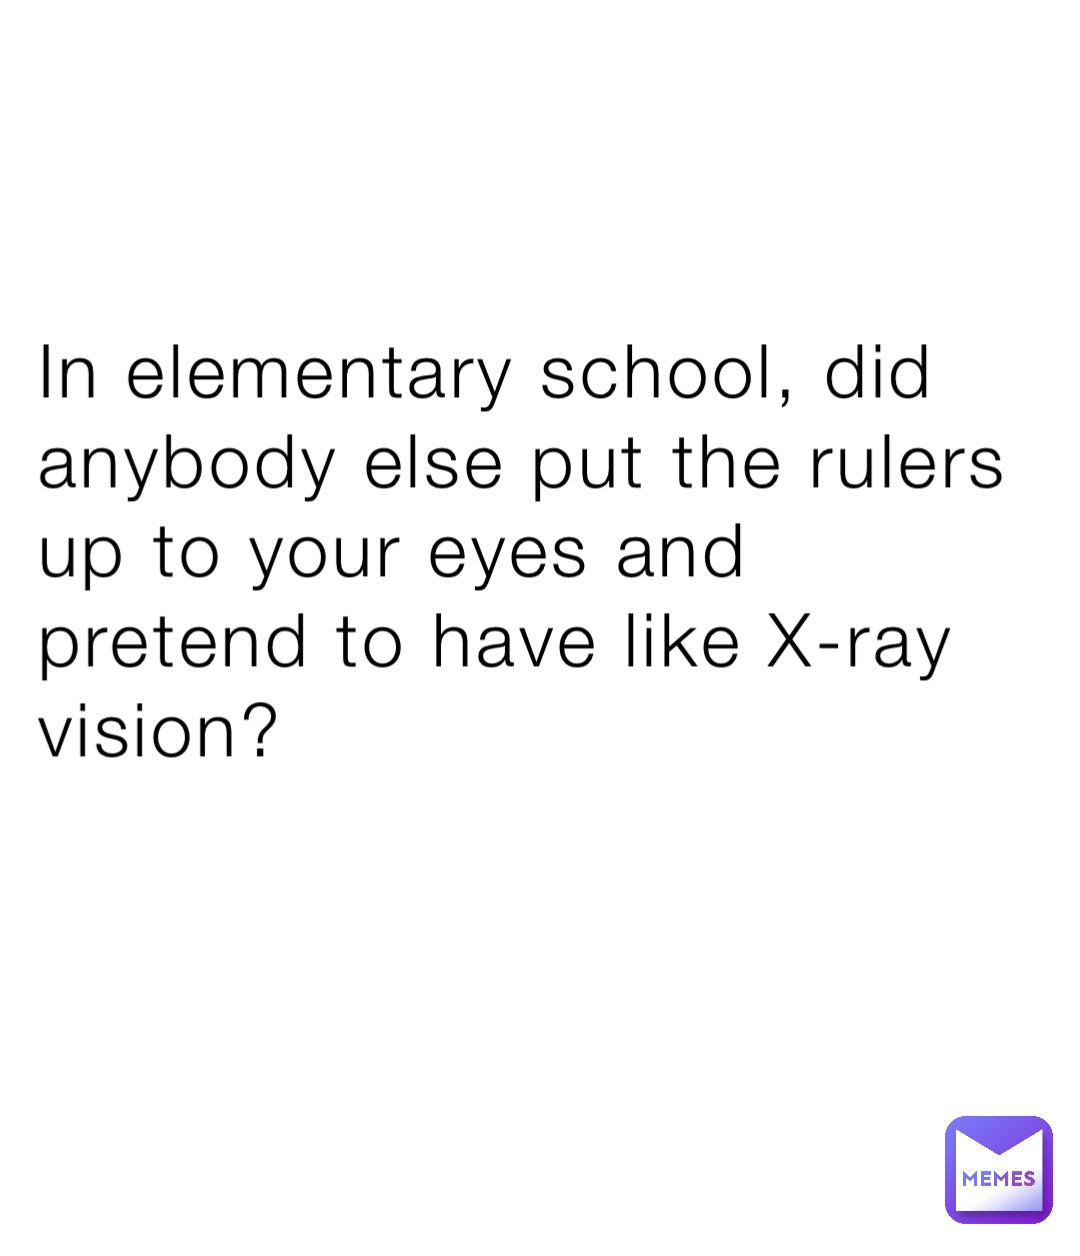 In elementary school, did anybody else put the rulers up to your eyes and pretend to have like X-ray vision?